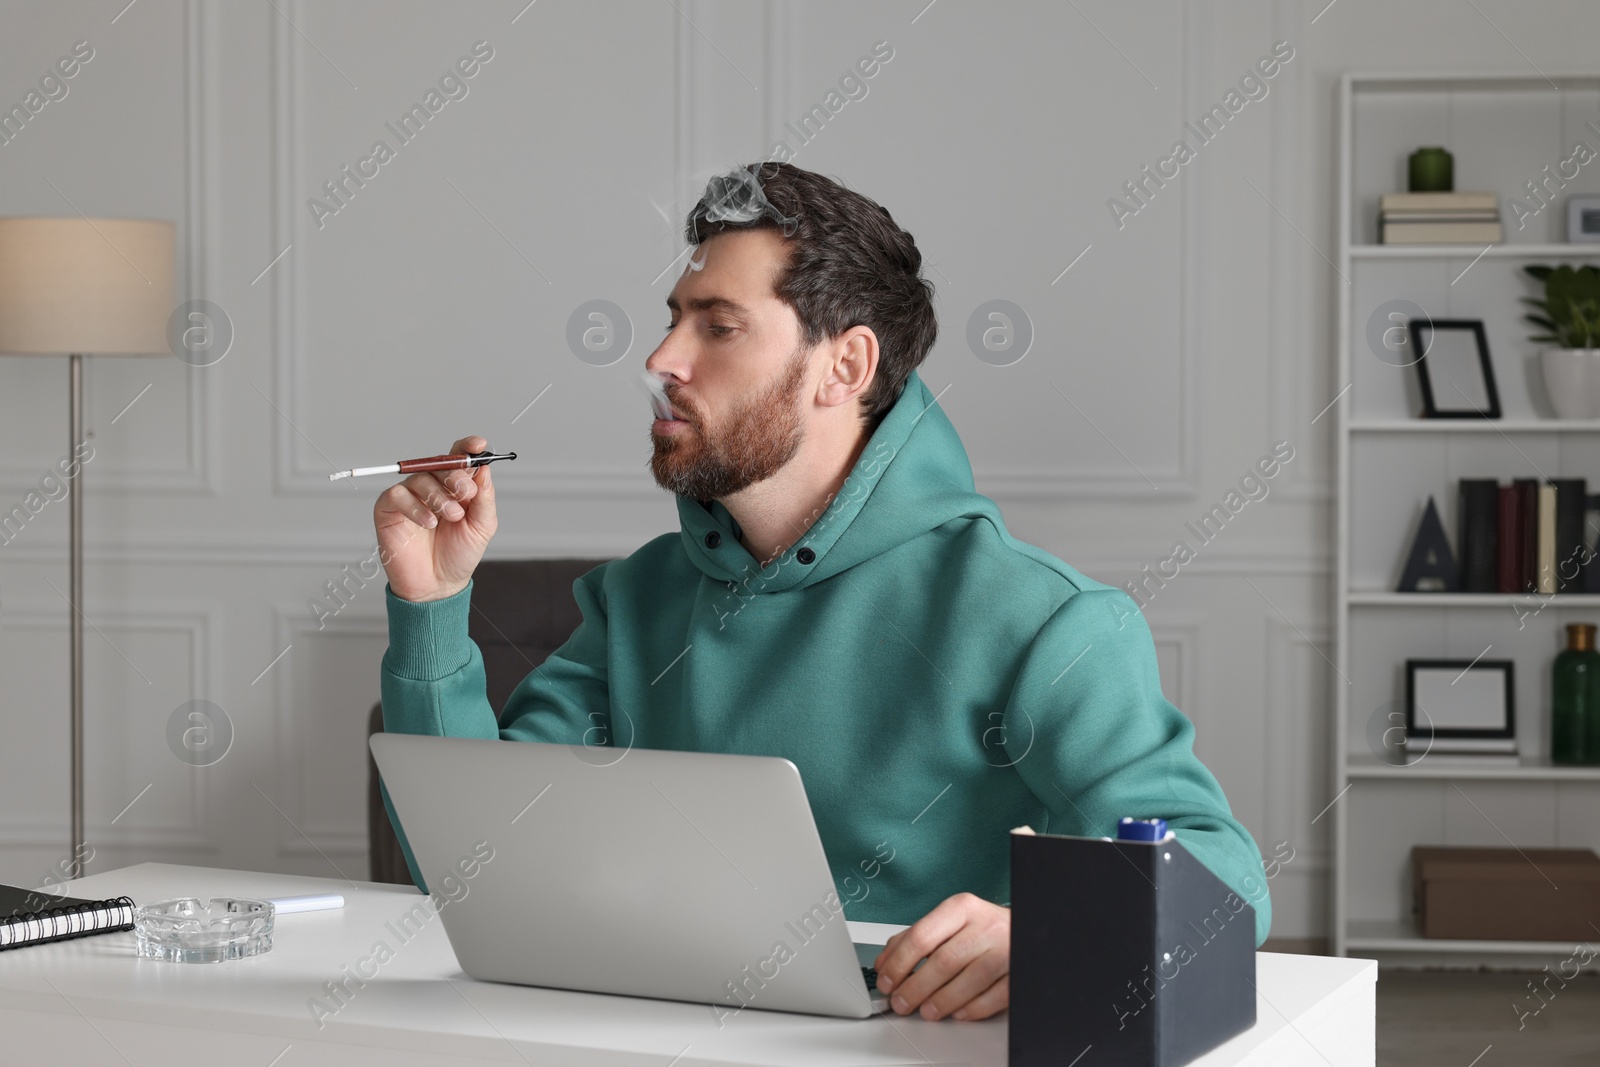 Photo of Man using cigarette holder for smoking at workplace in office